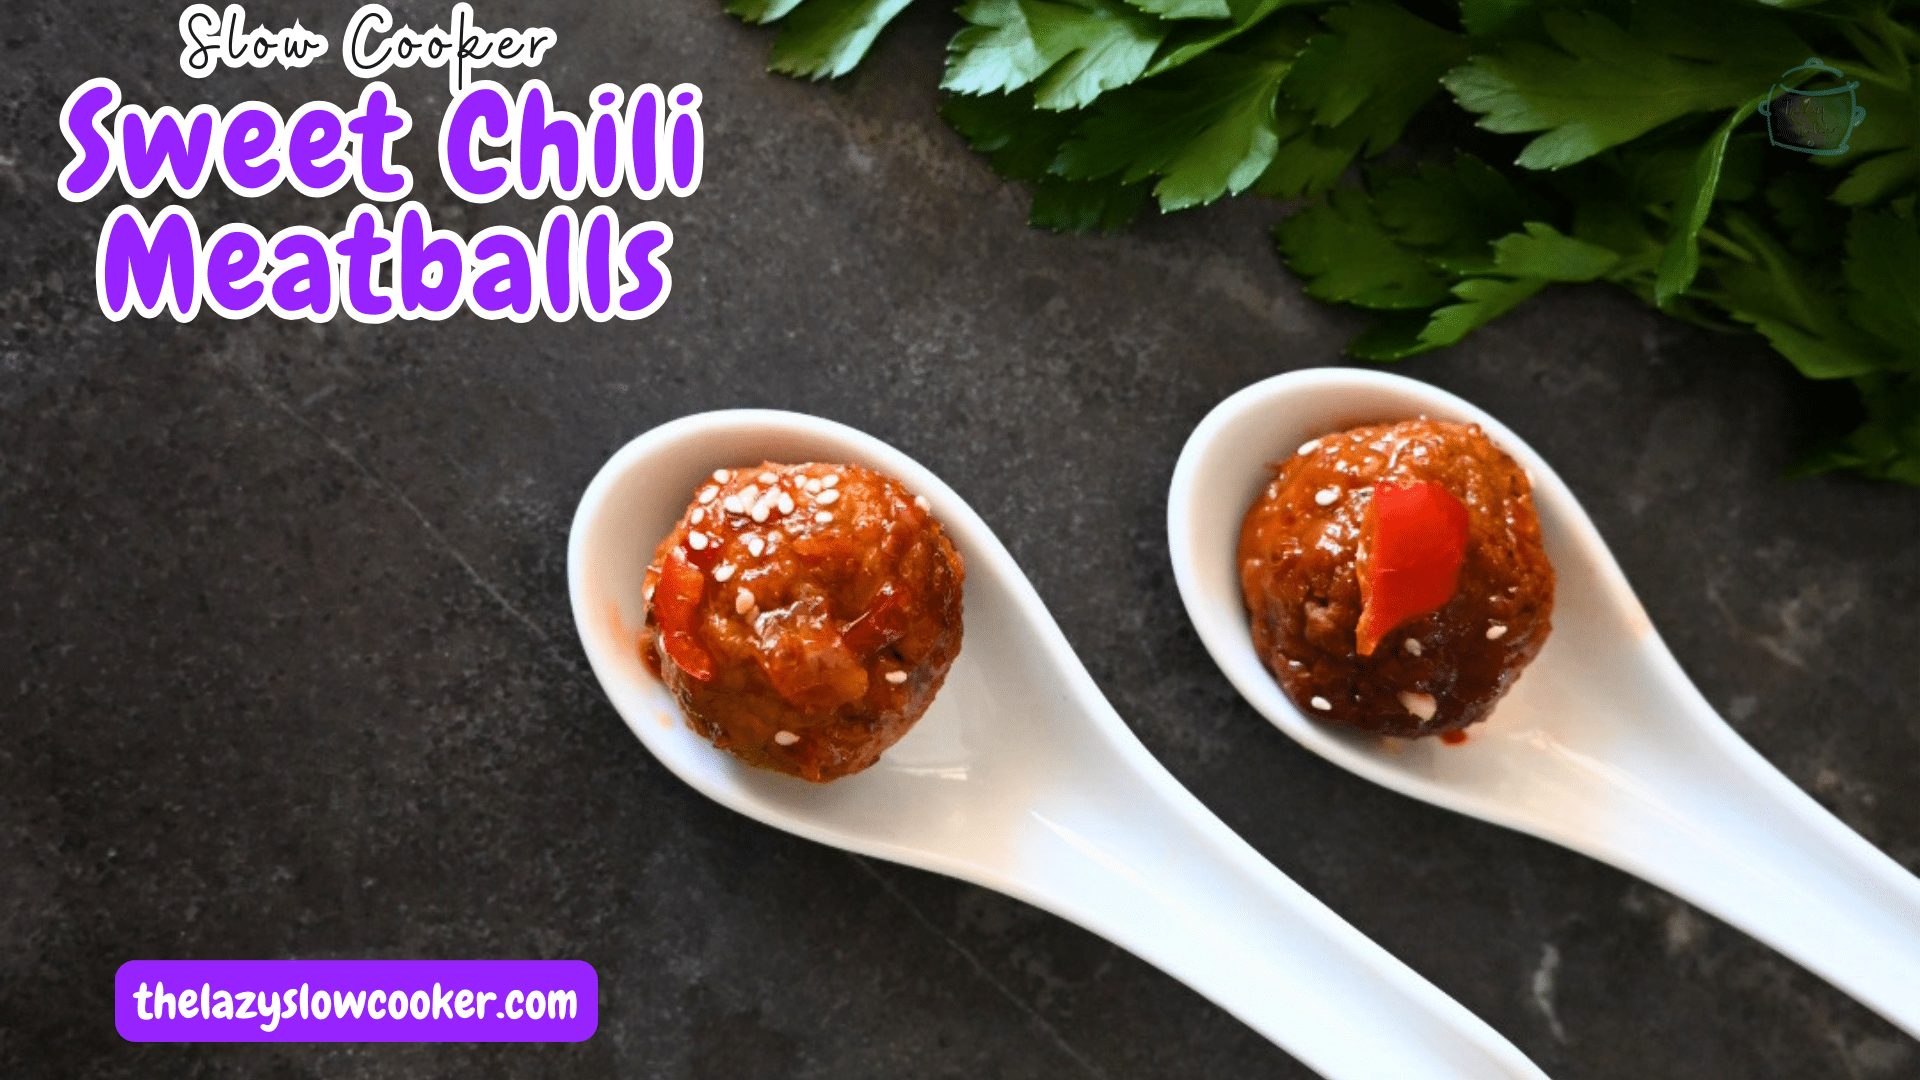 Slow Cooker Sweet Chili Meatballs - The Lazy Slow Cooker